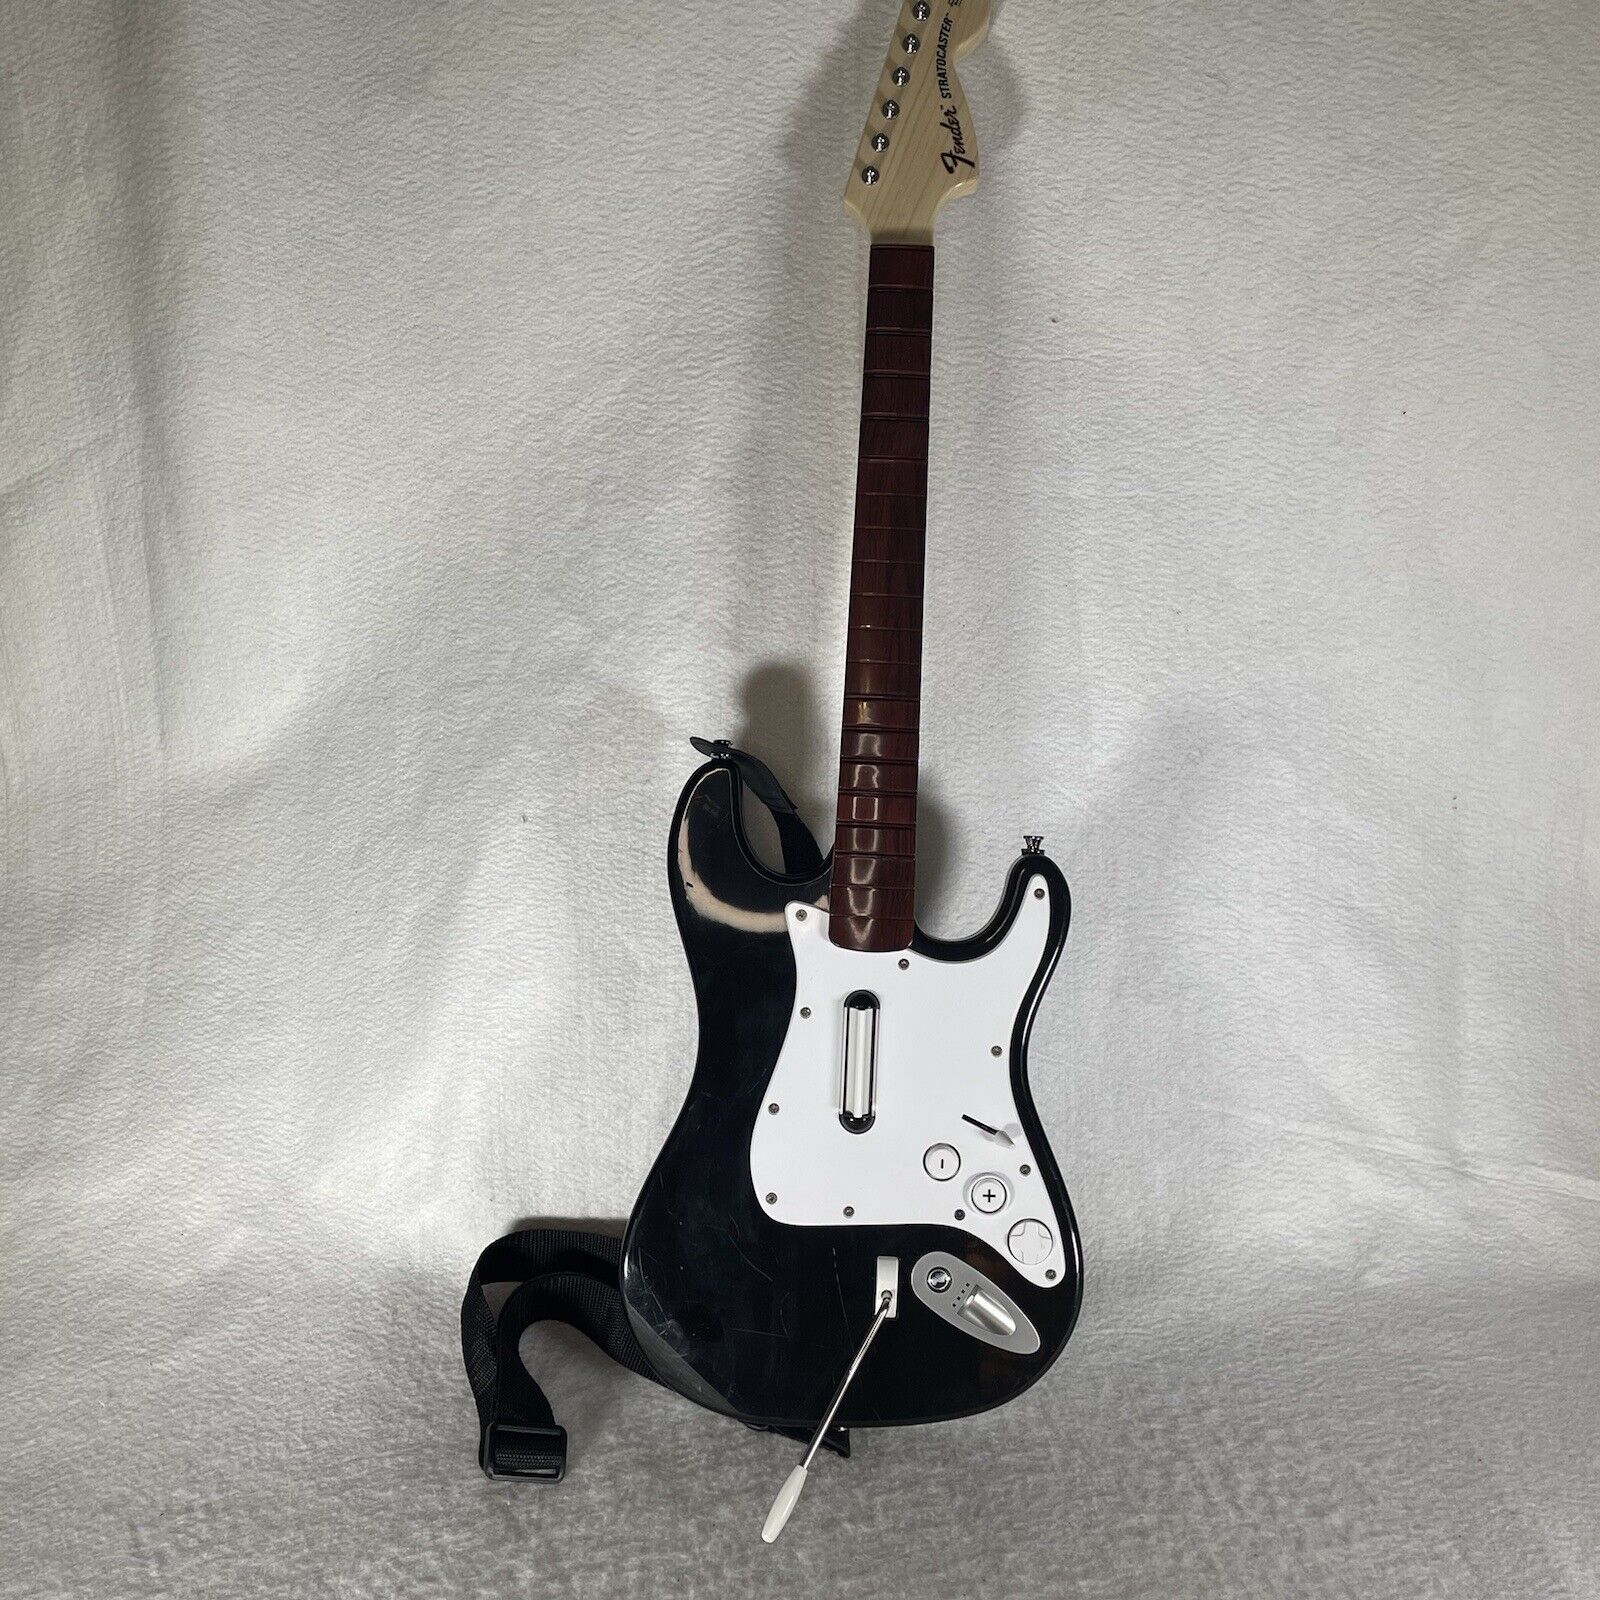 Primary image for Rock Band Wii Harmonix Guitar Controller Fender Stratocaster Model 19091